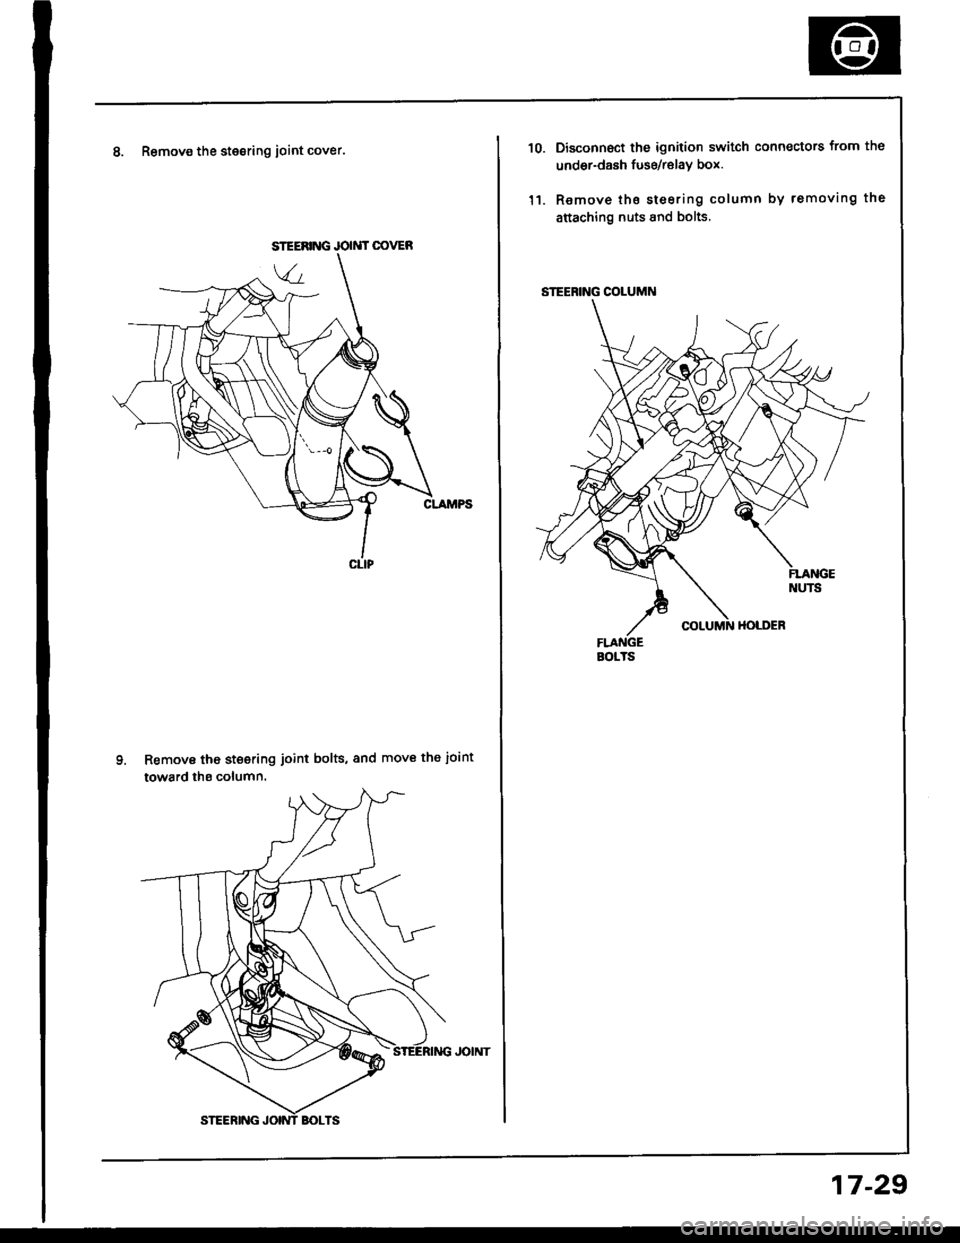 HONDA INTEGRA 1994 4.G Owners Manual 8. Remov€ the stesring ioint cover.
Remove tho steering joint bolts, and move the ioint
toward ths column.
JOIMT OOVER
STEERING COLUMN
BOITS
10.
l1.
Disconnoct the ignition switch connectors from t